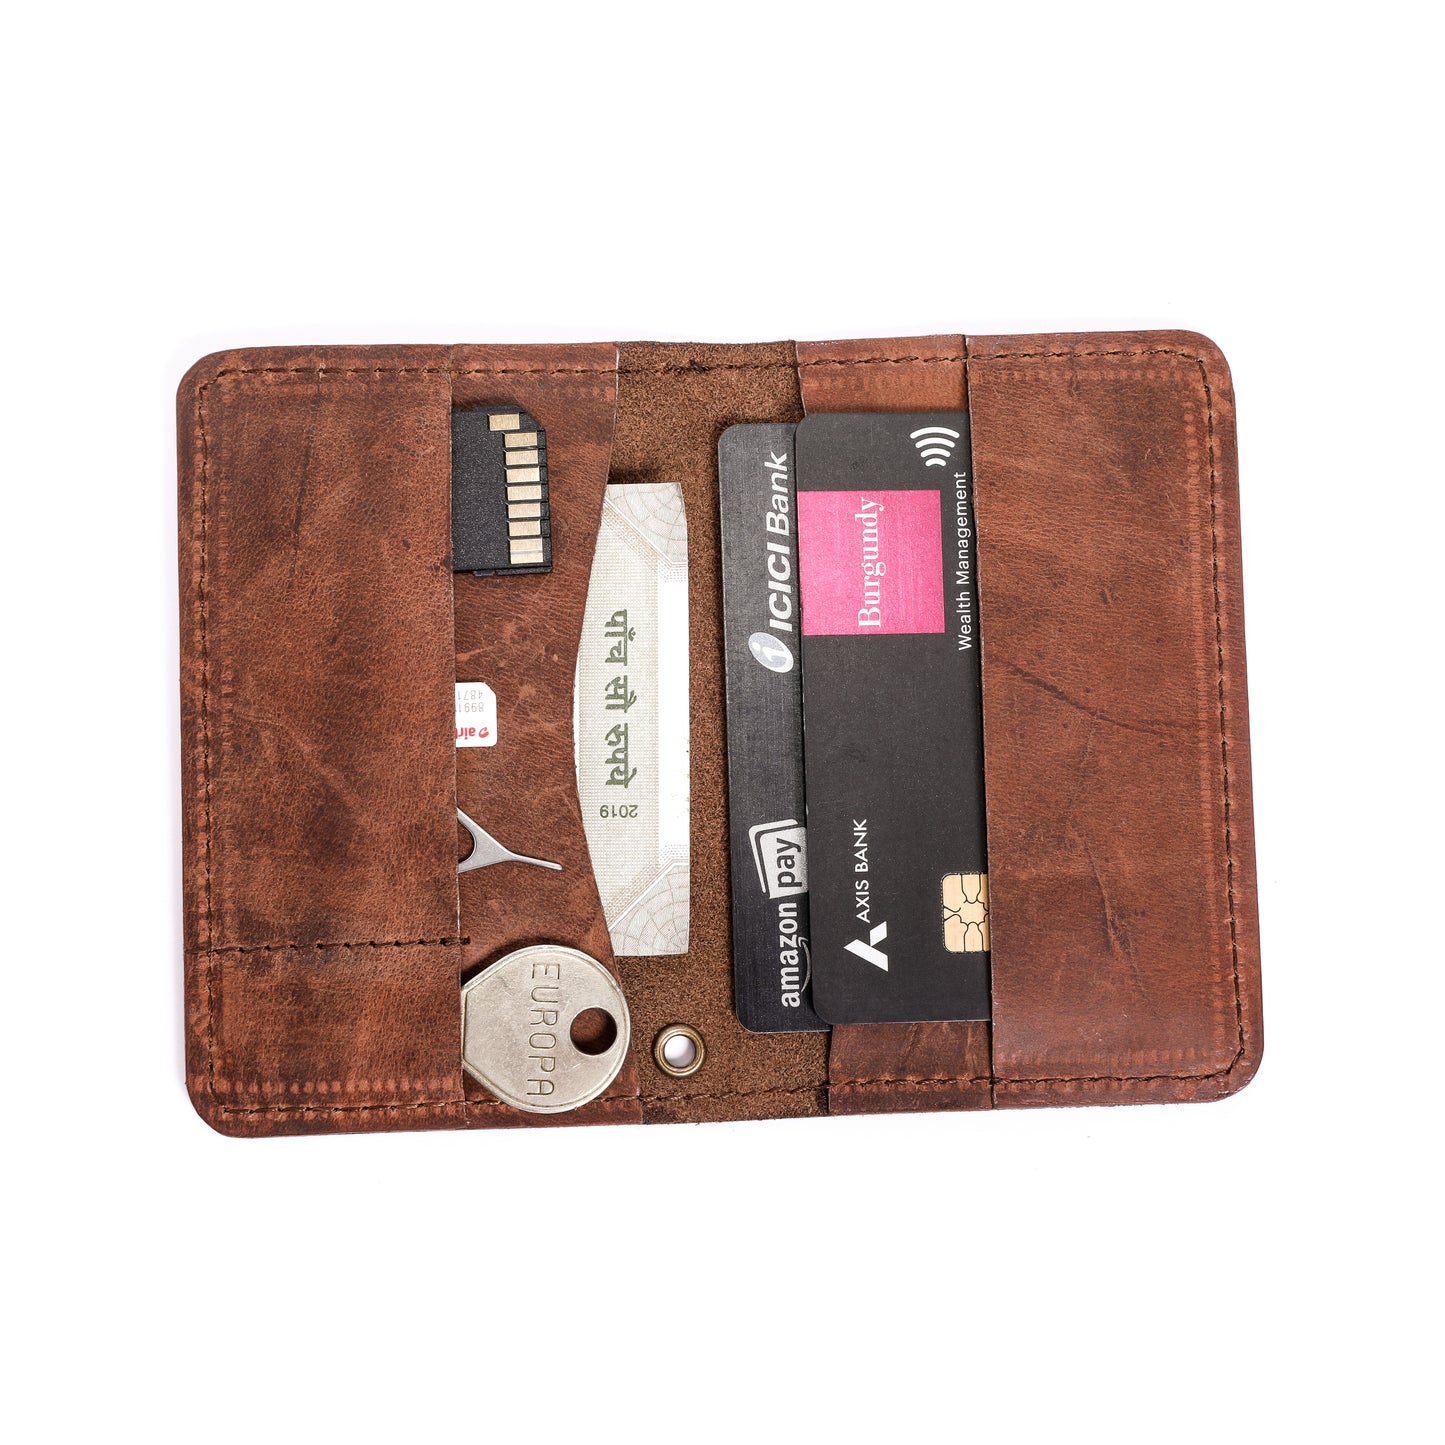 The Mini - Leather Card wallet